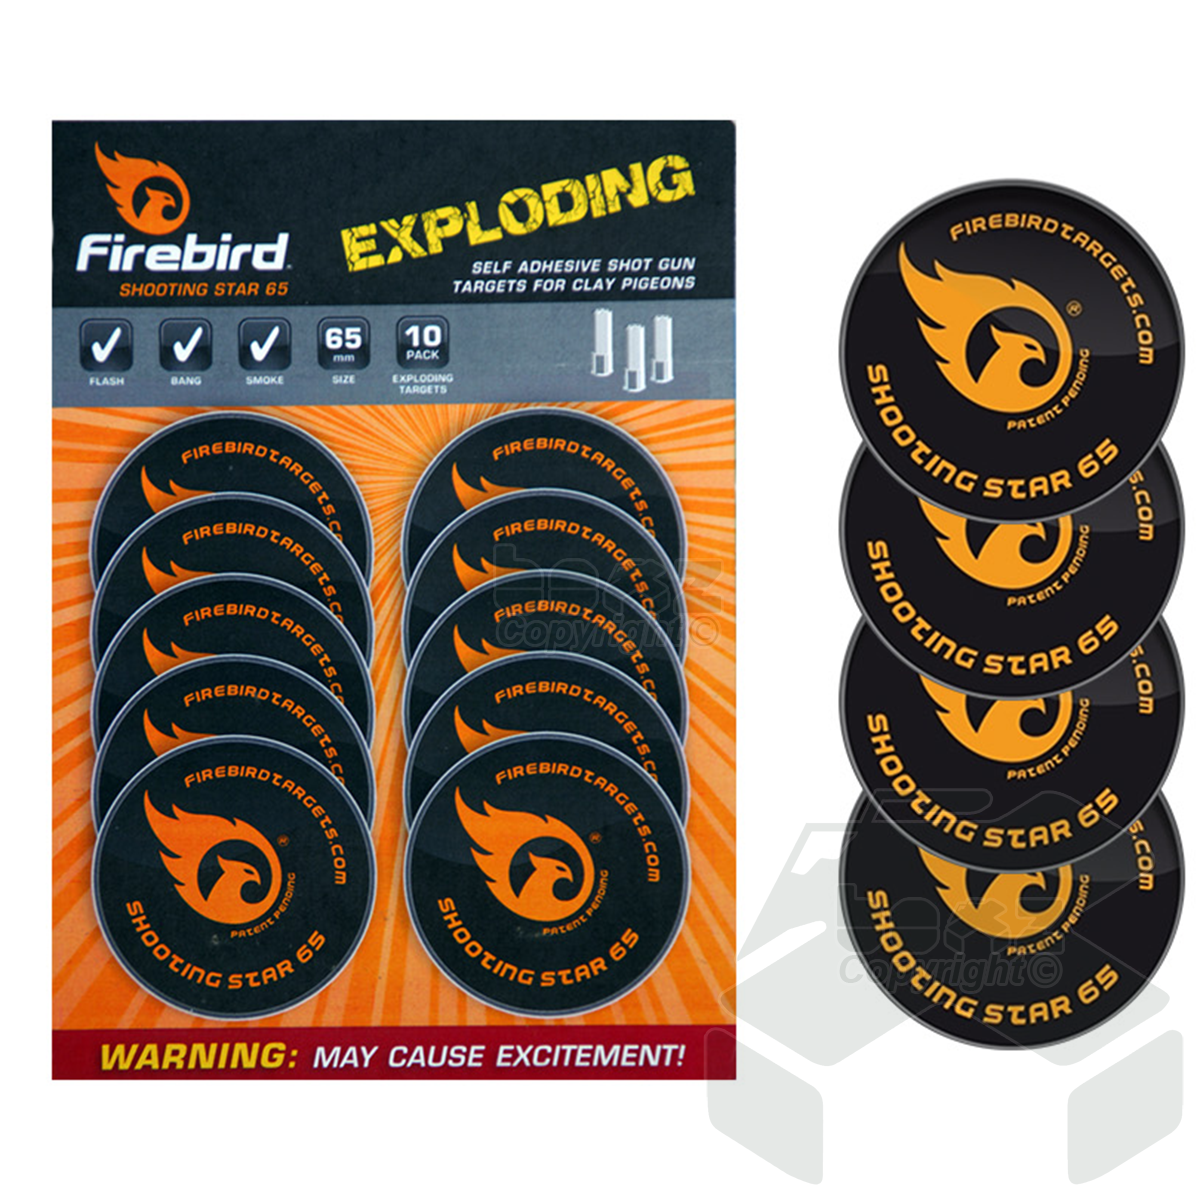 FireBird Shooting Star for Clay Targets 10 Pack